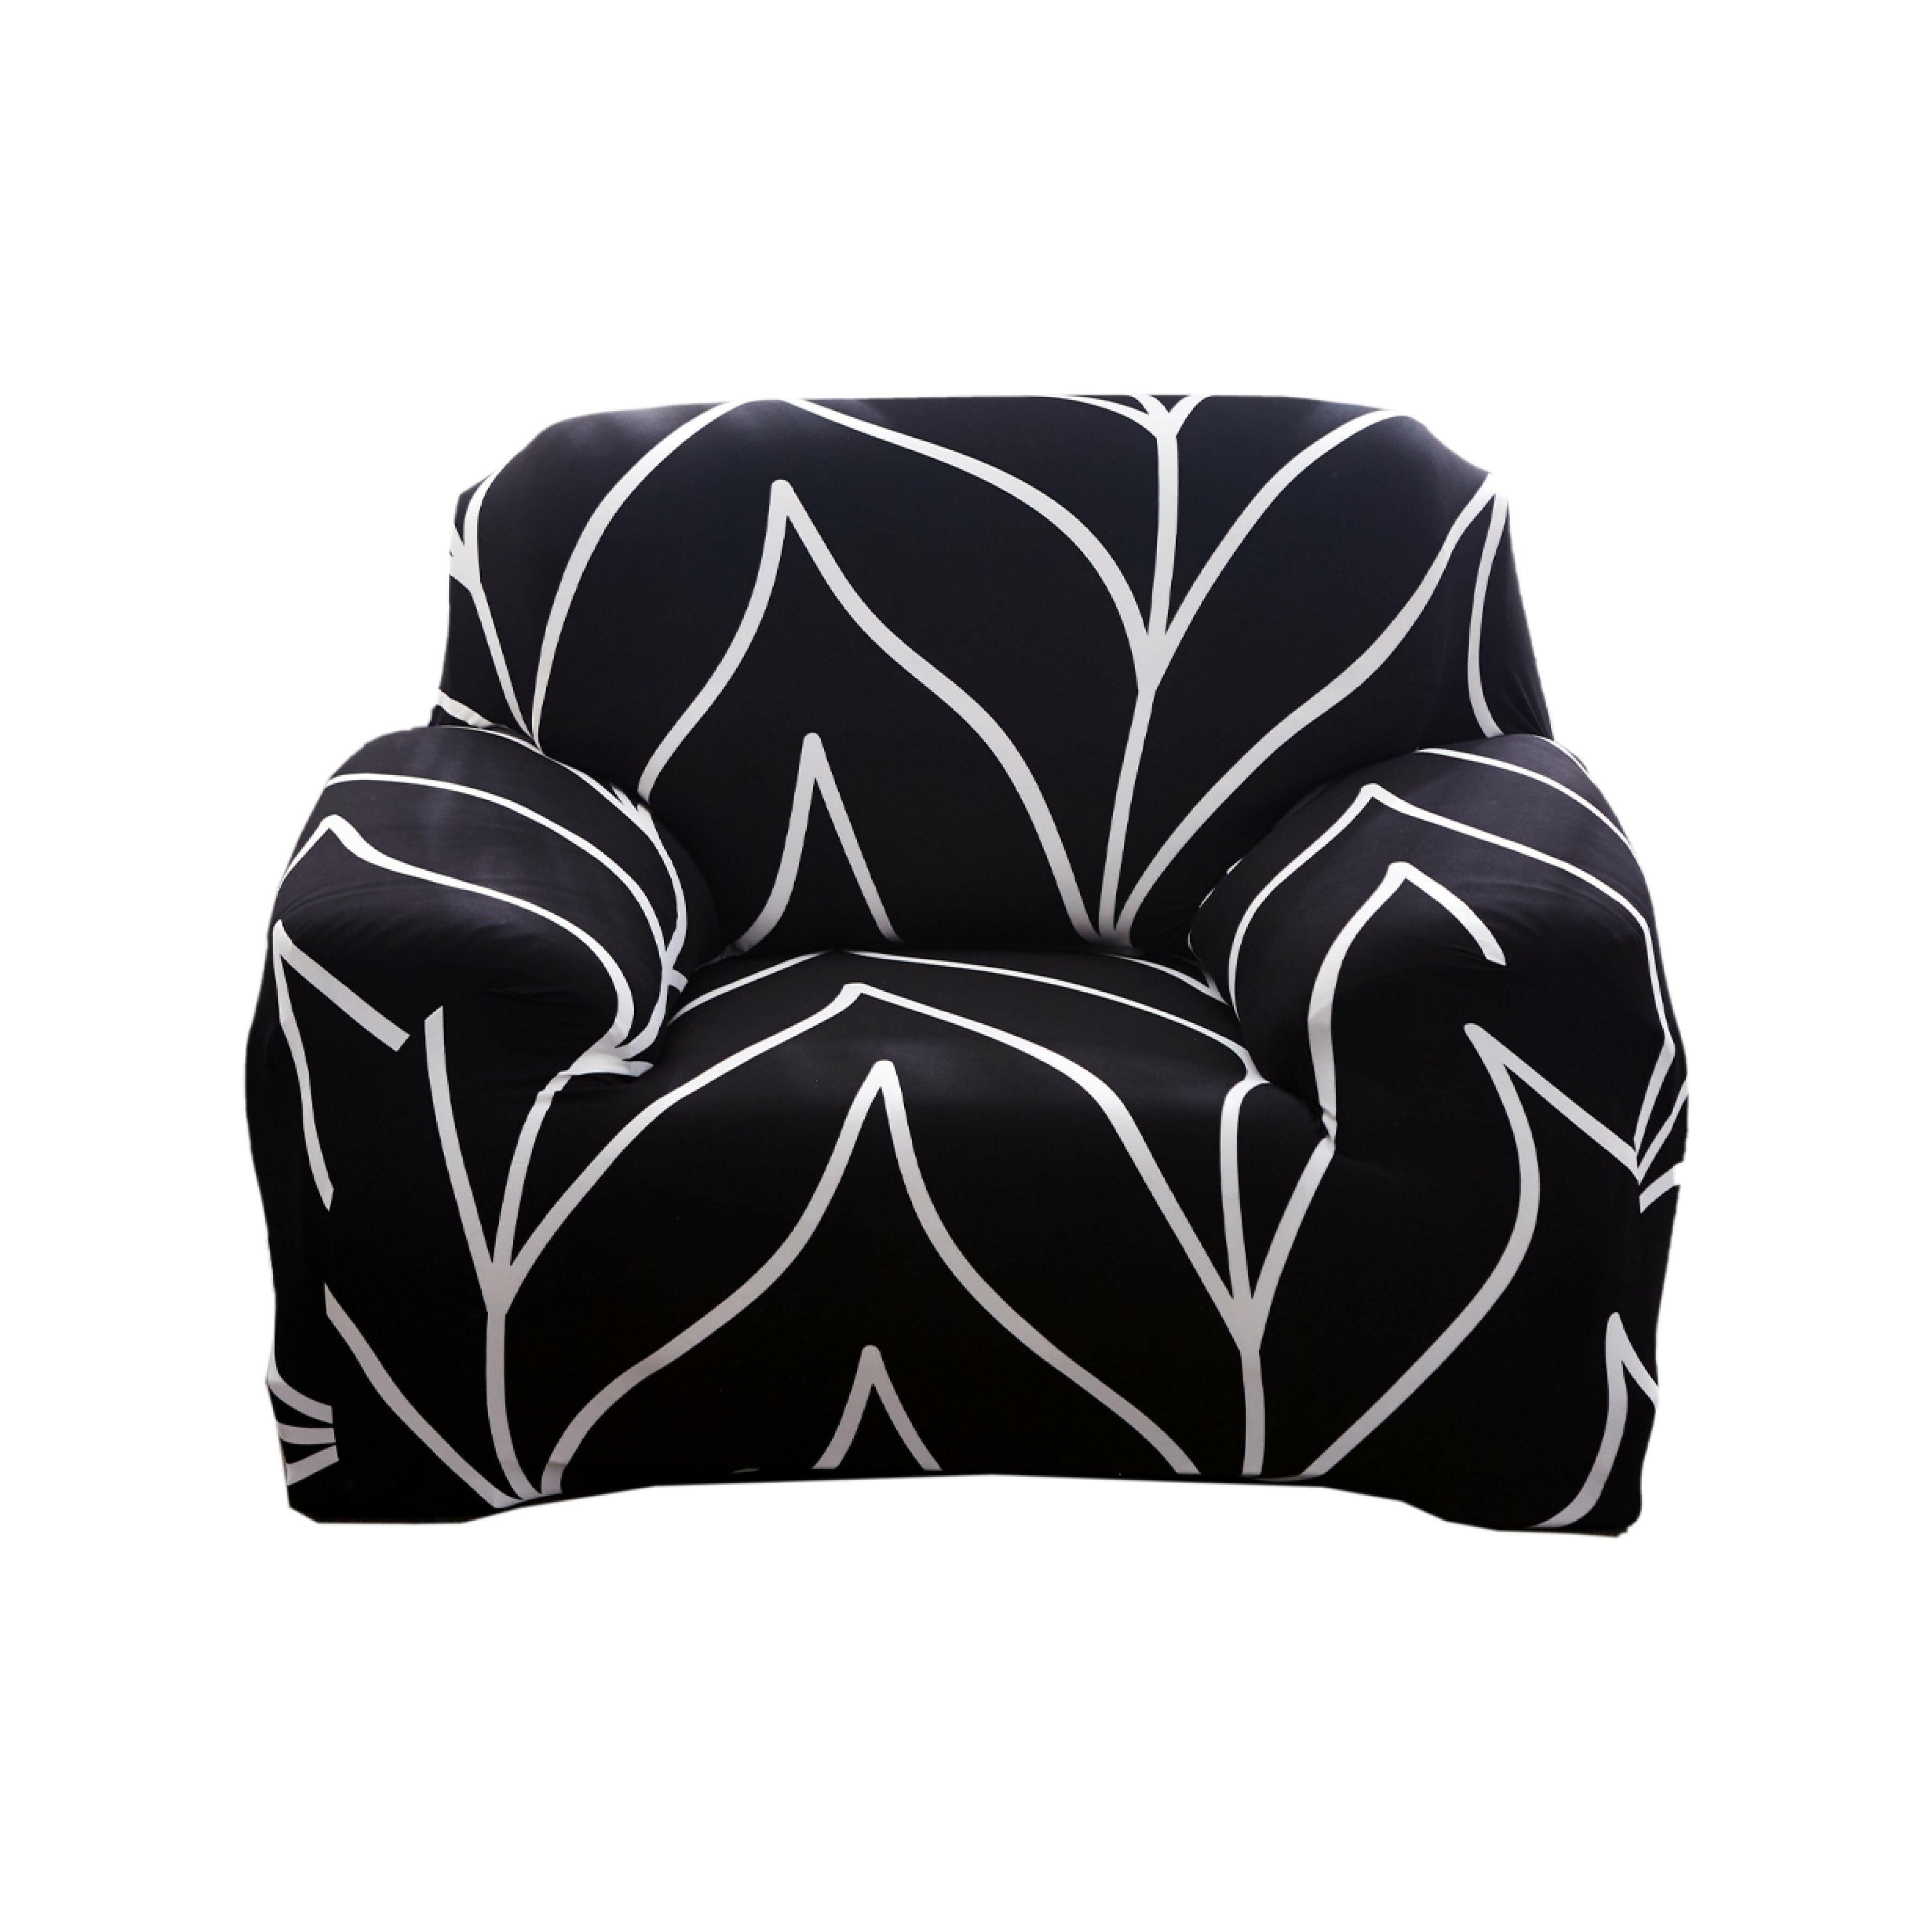 Hyper Cover Stretch Sofa Cover with Patterns Black Tone | Sofa Covers | Brilliant Home Living